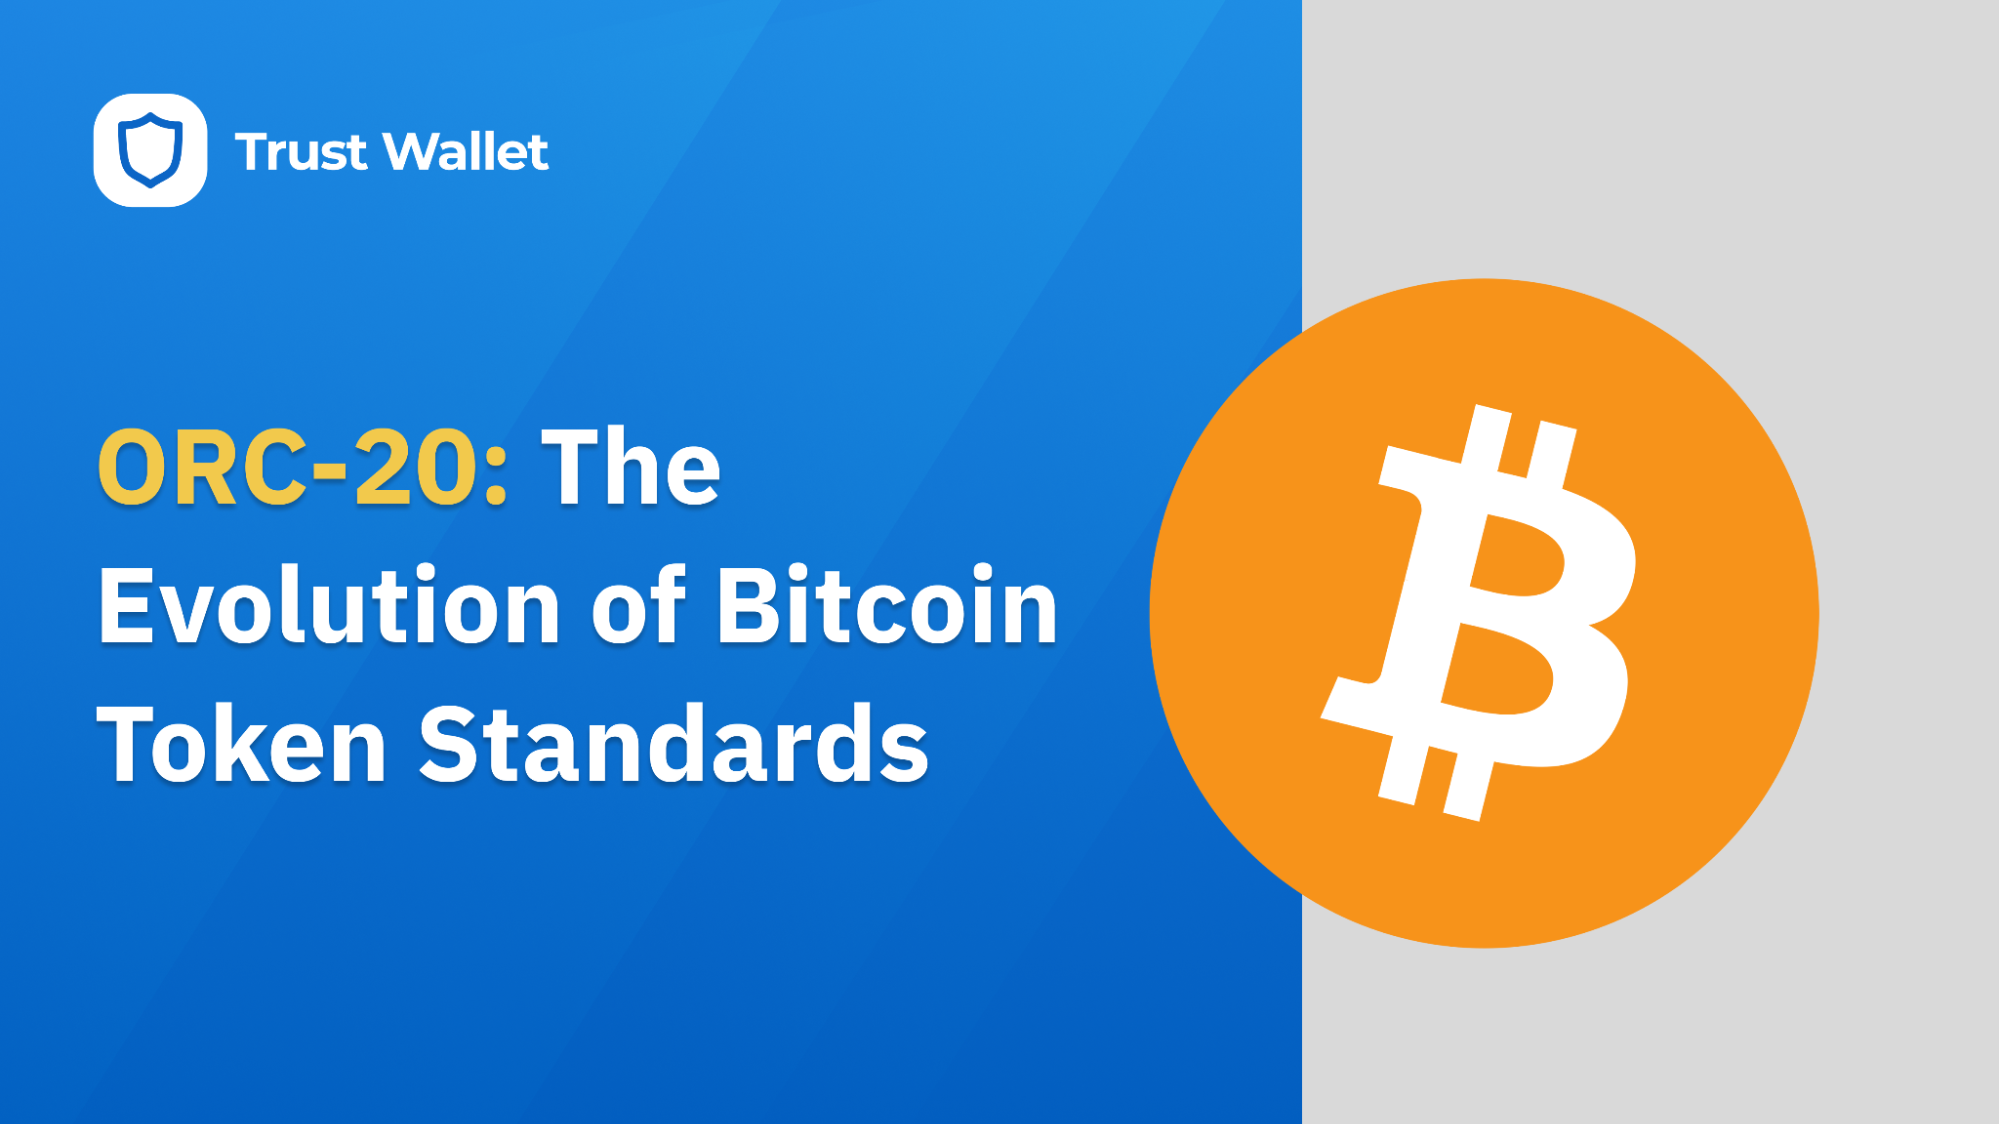 ORC-20: The Evolution of Bitcoin Token Standards